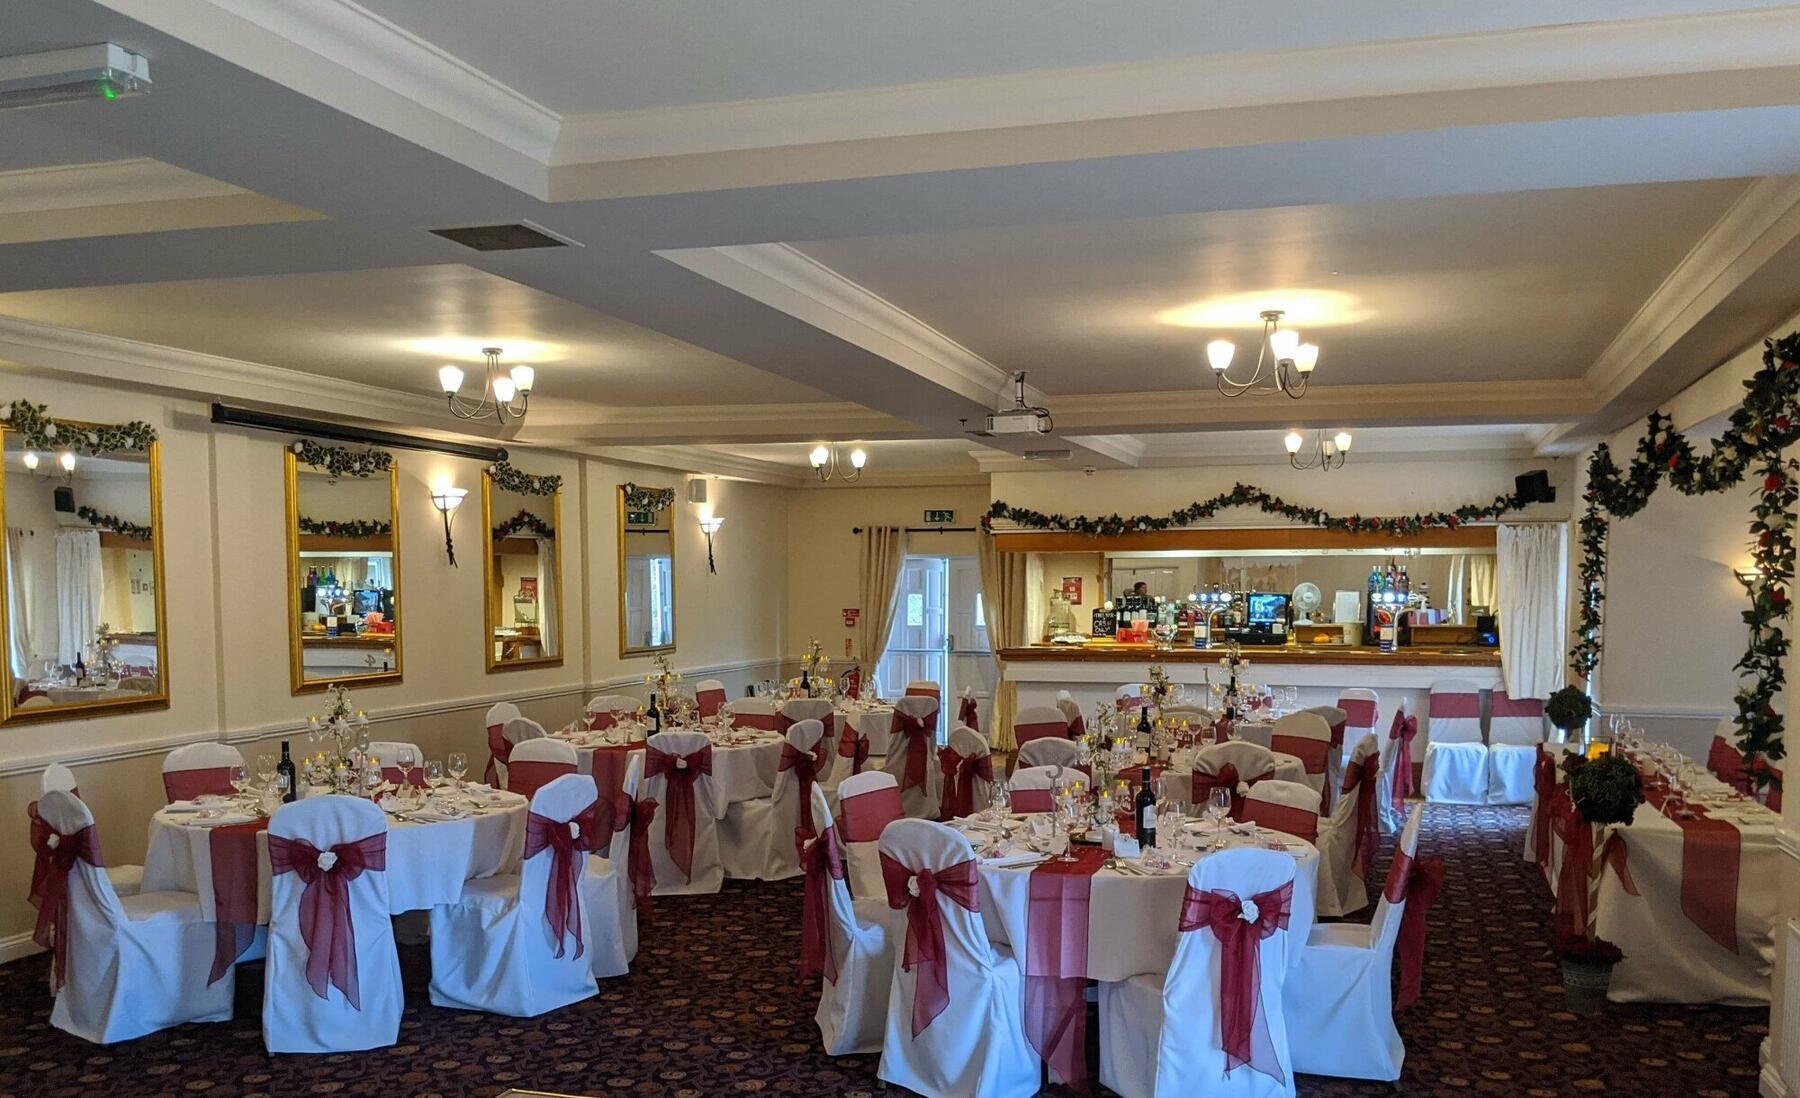 Function Room for events